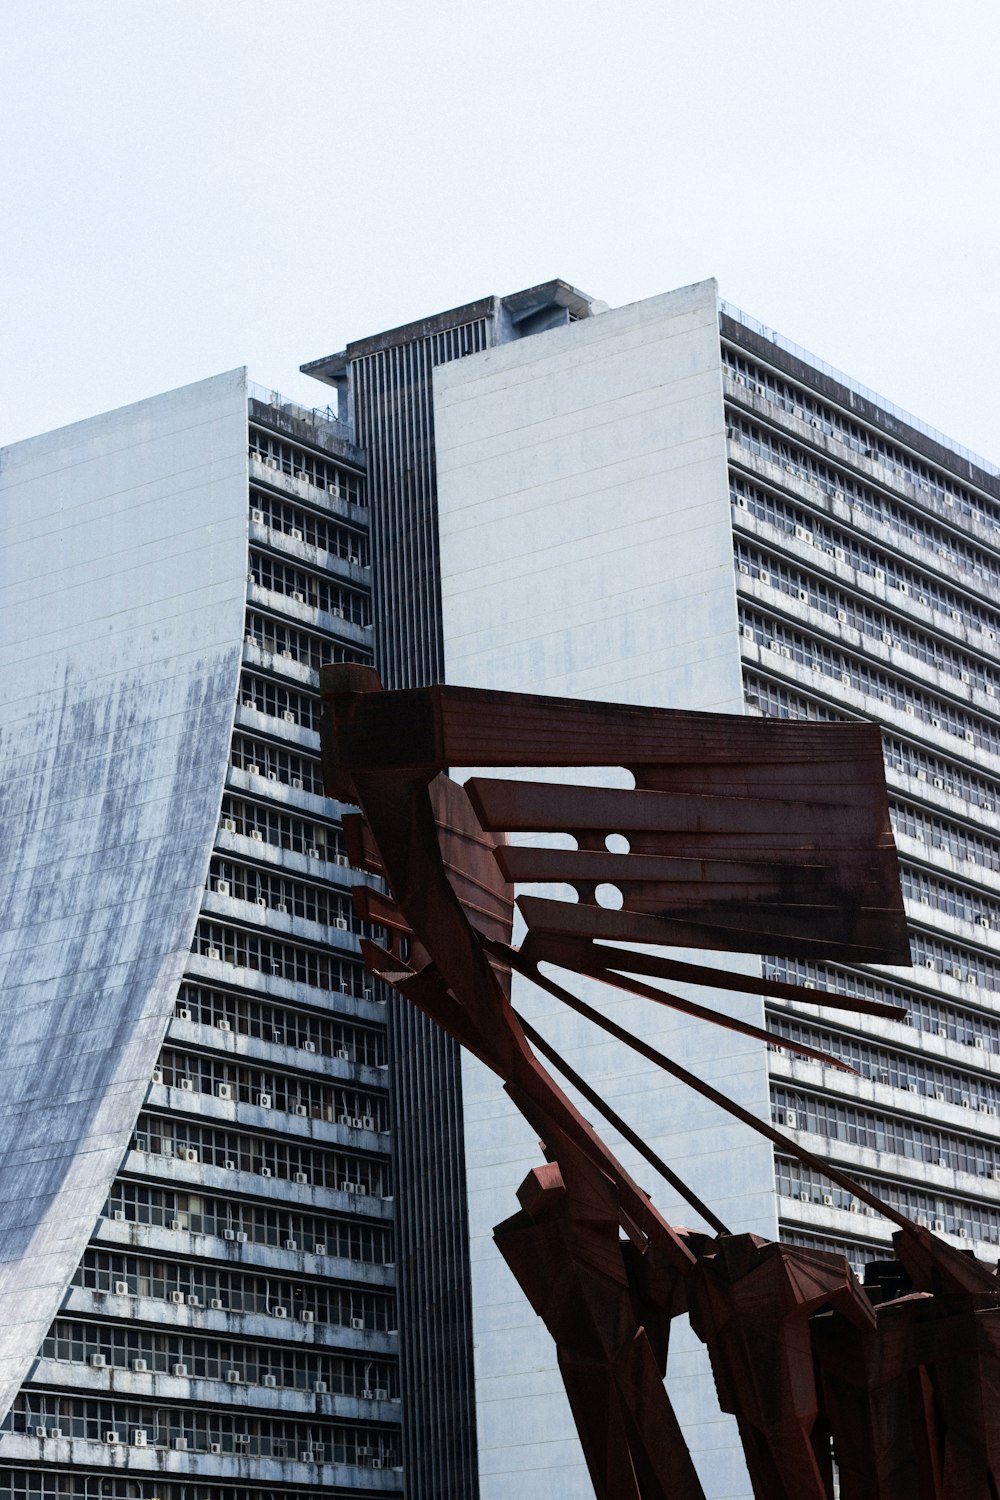 a large metal sculpture in front of a tall building